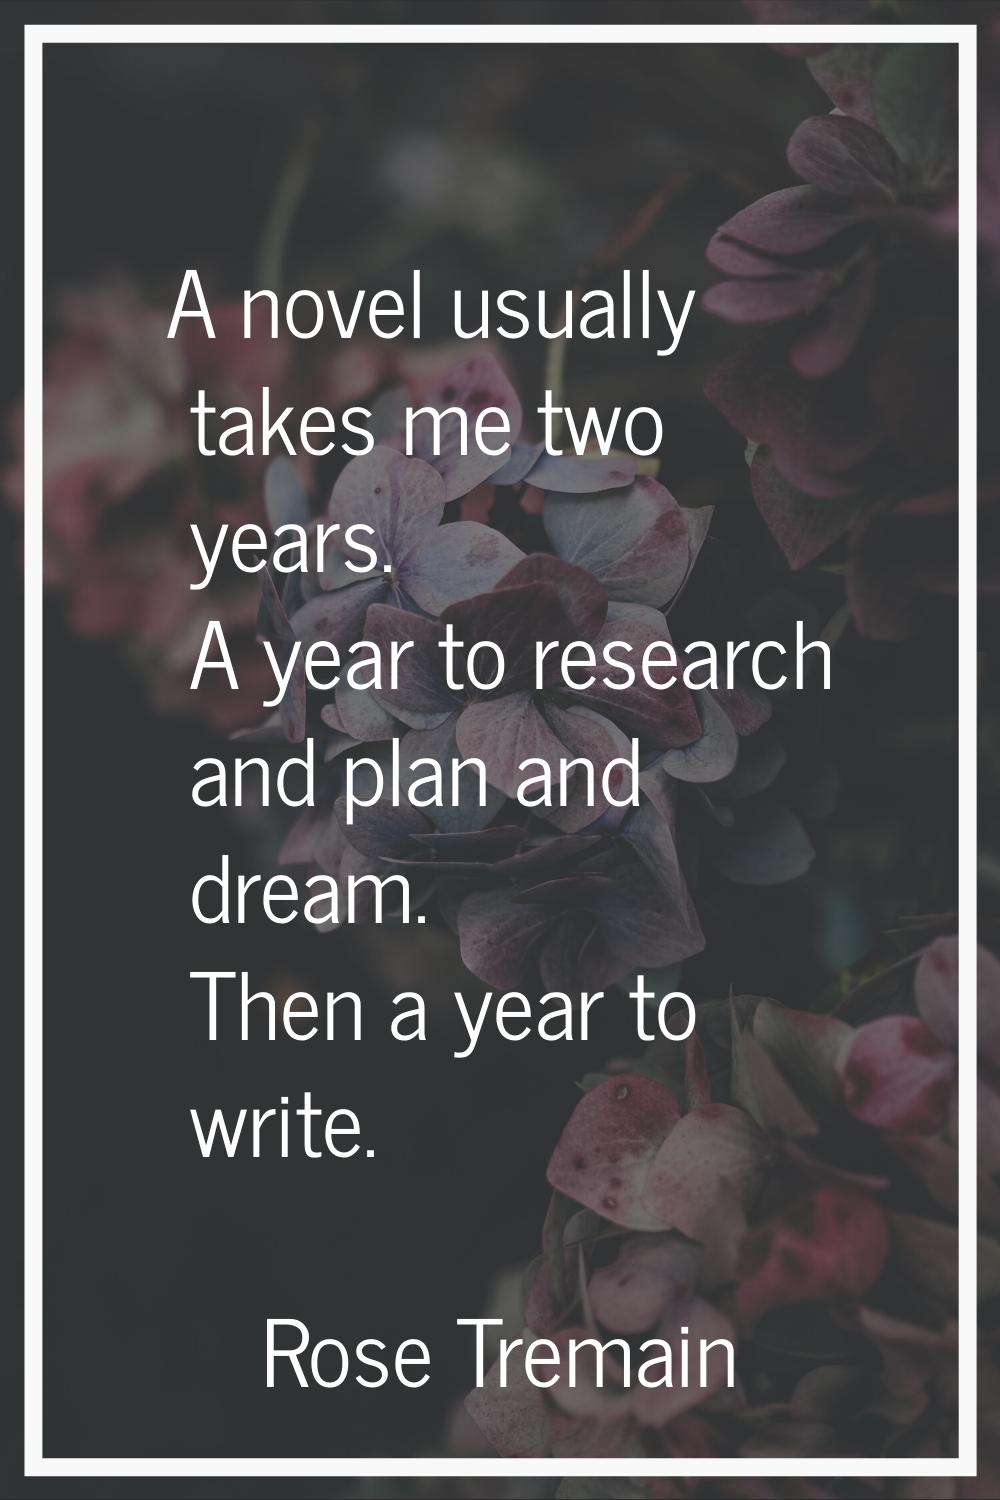 A novel usually takes me two years. A year to research and plan and dream. Then a year to write.